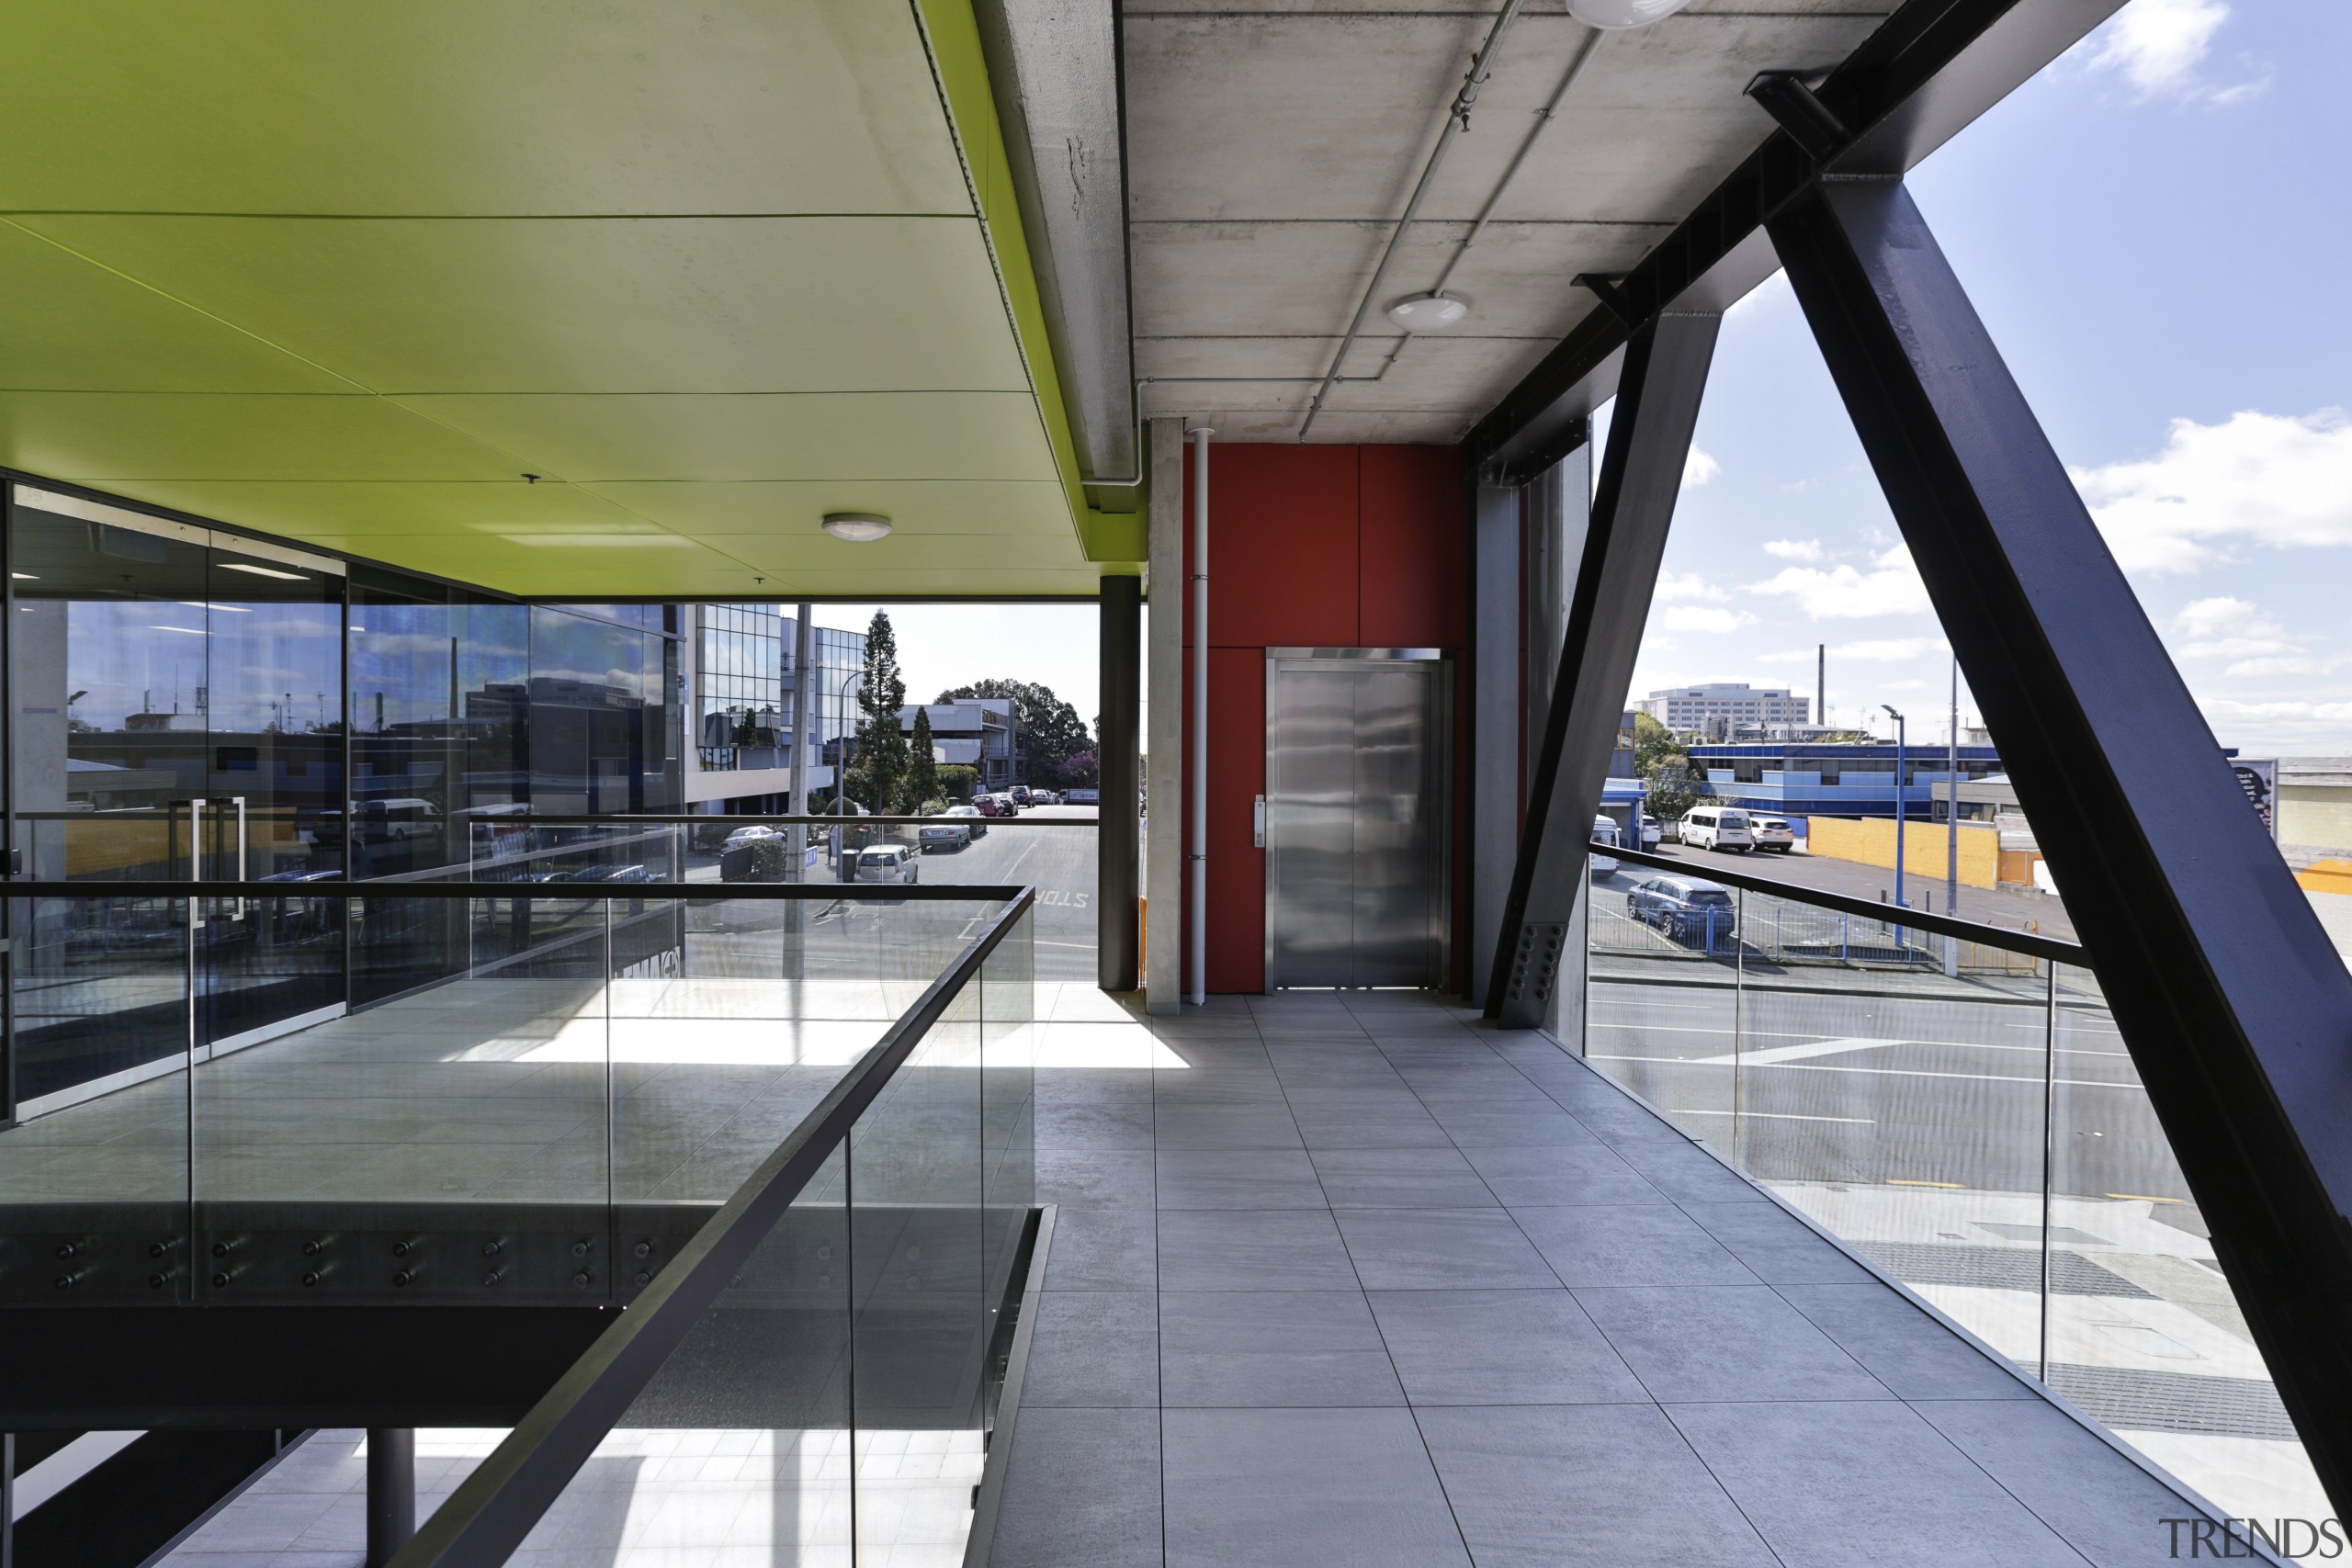 Broad walkways provide a direct circulation link from architecture, building, daylighting, gray